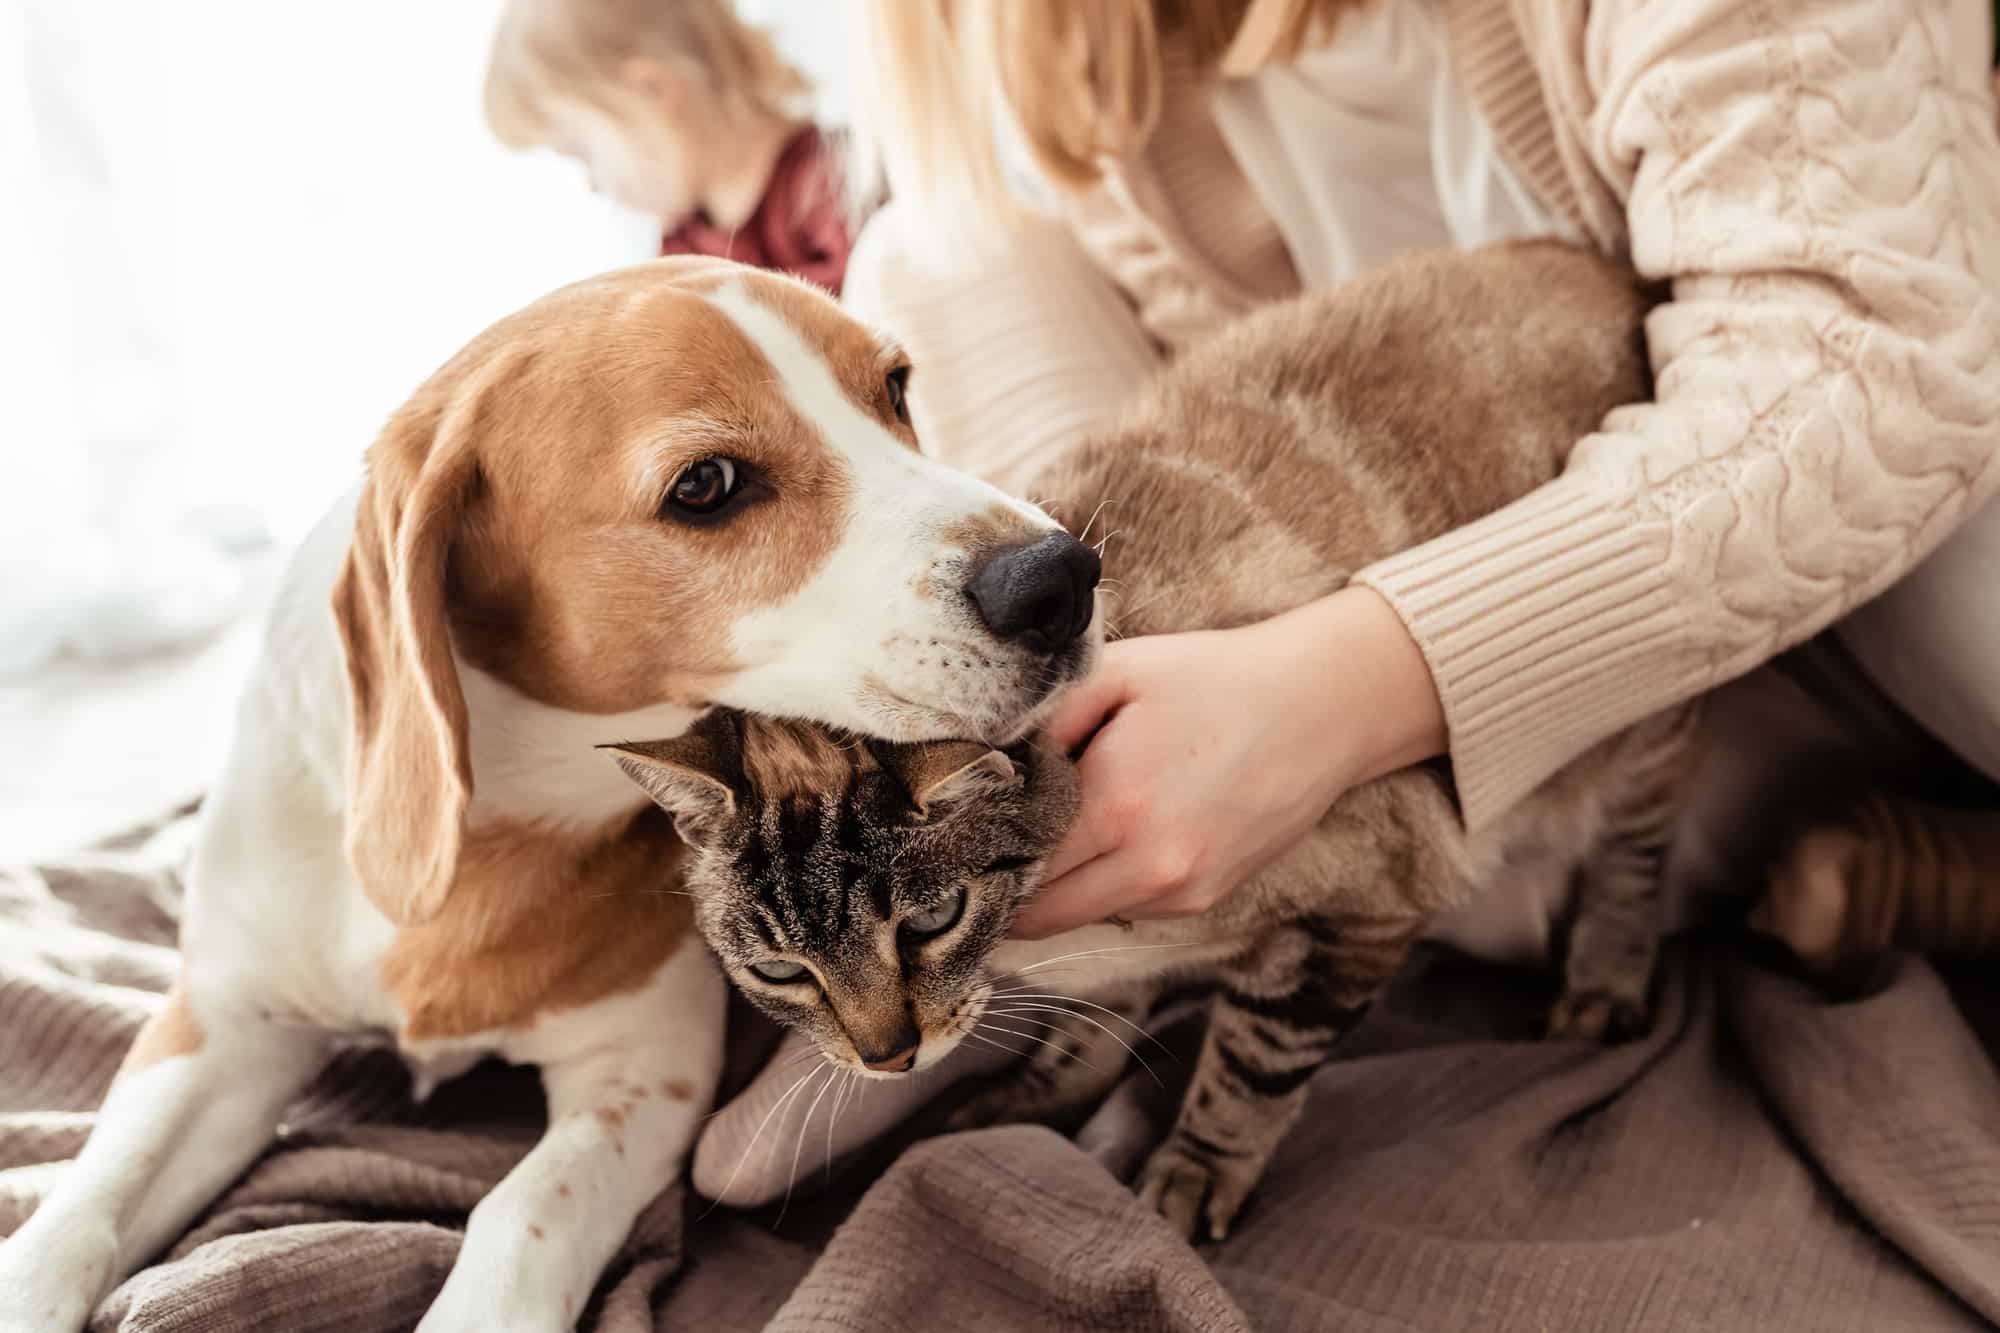 Cat and dog friendship. Beagle dog lying together with his cat friend on cozy blanket at home